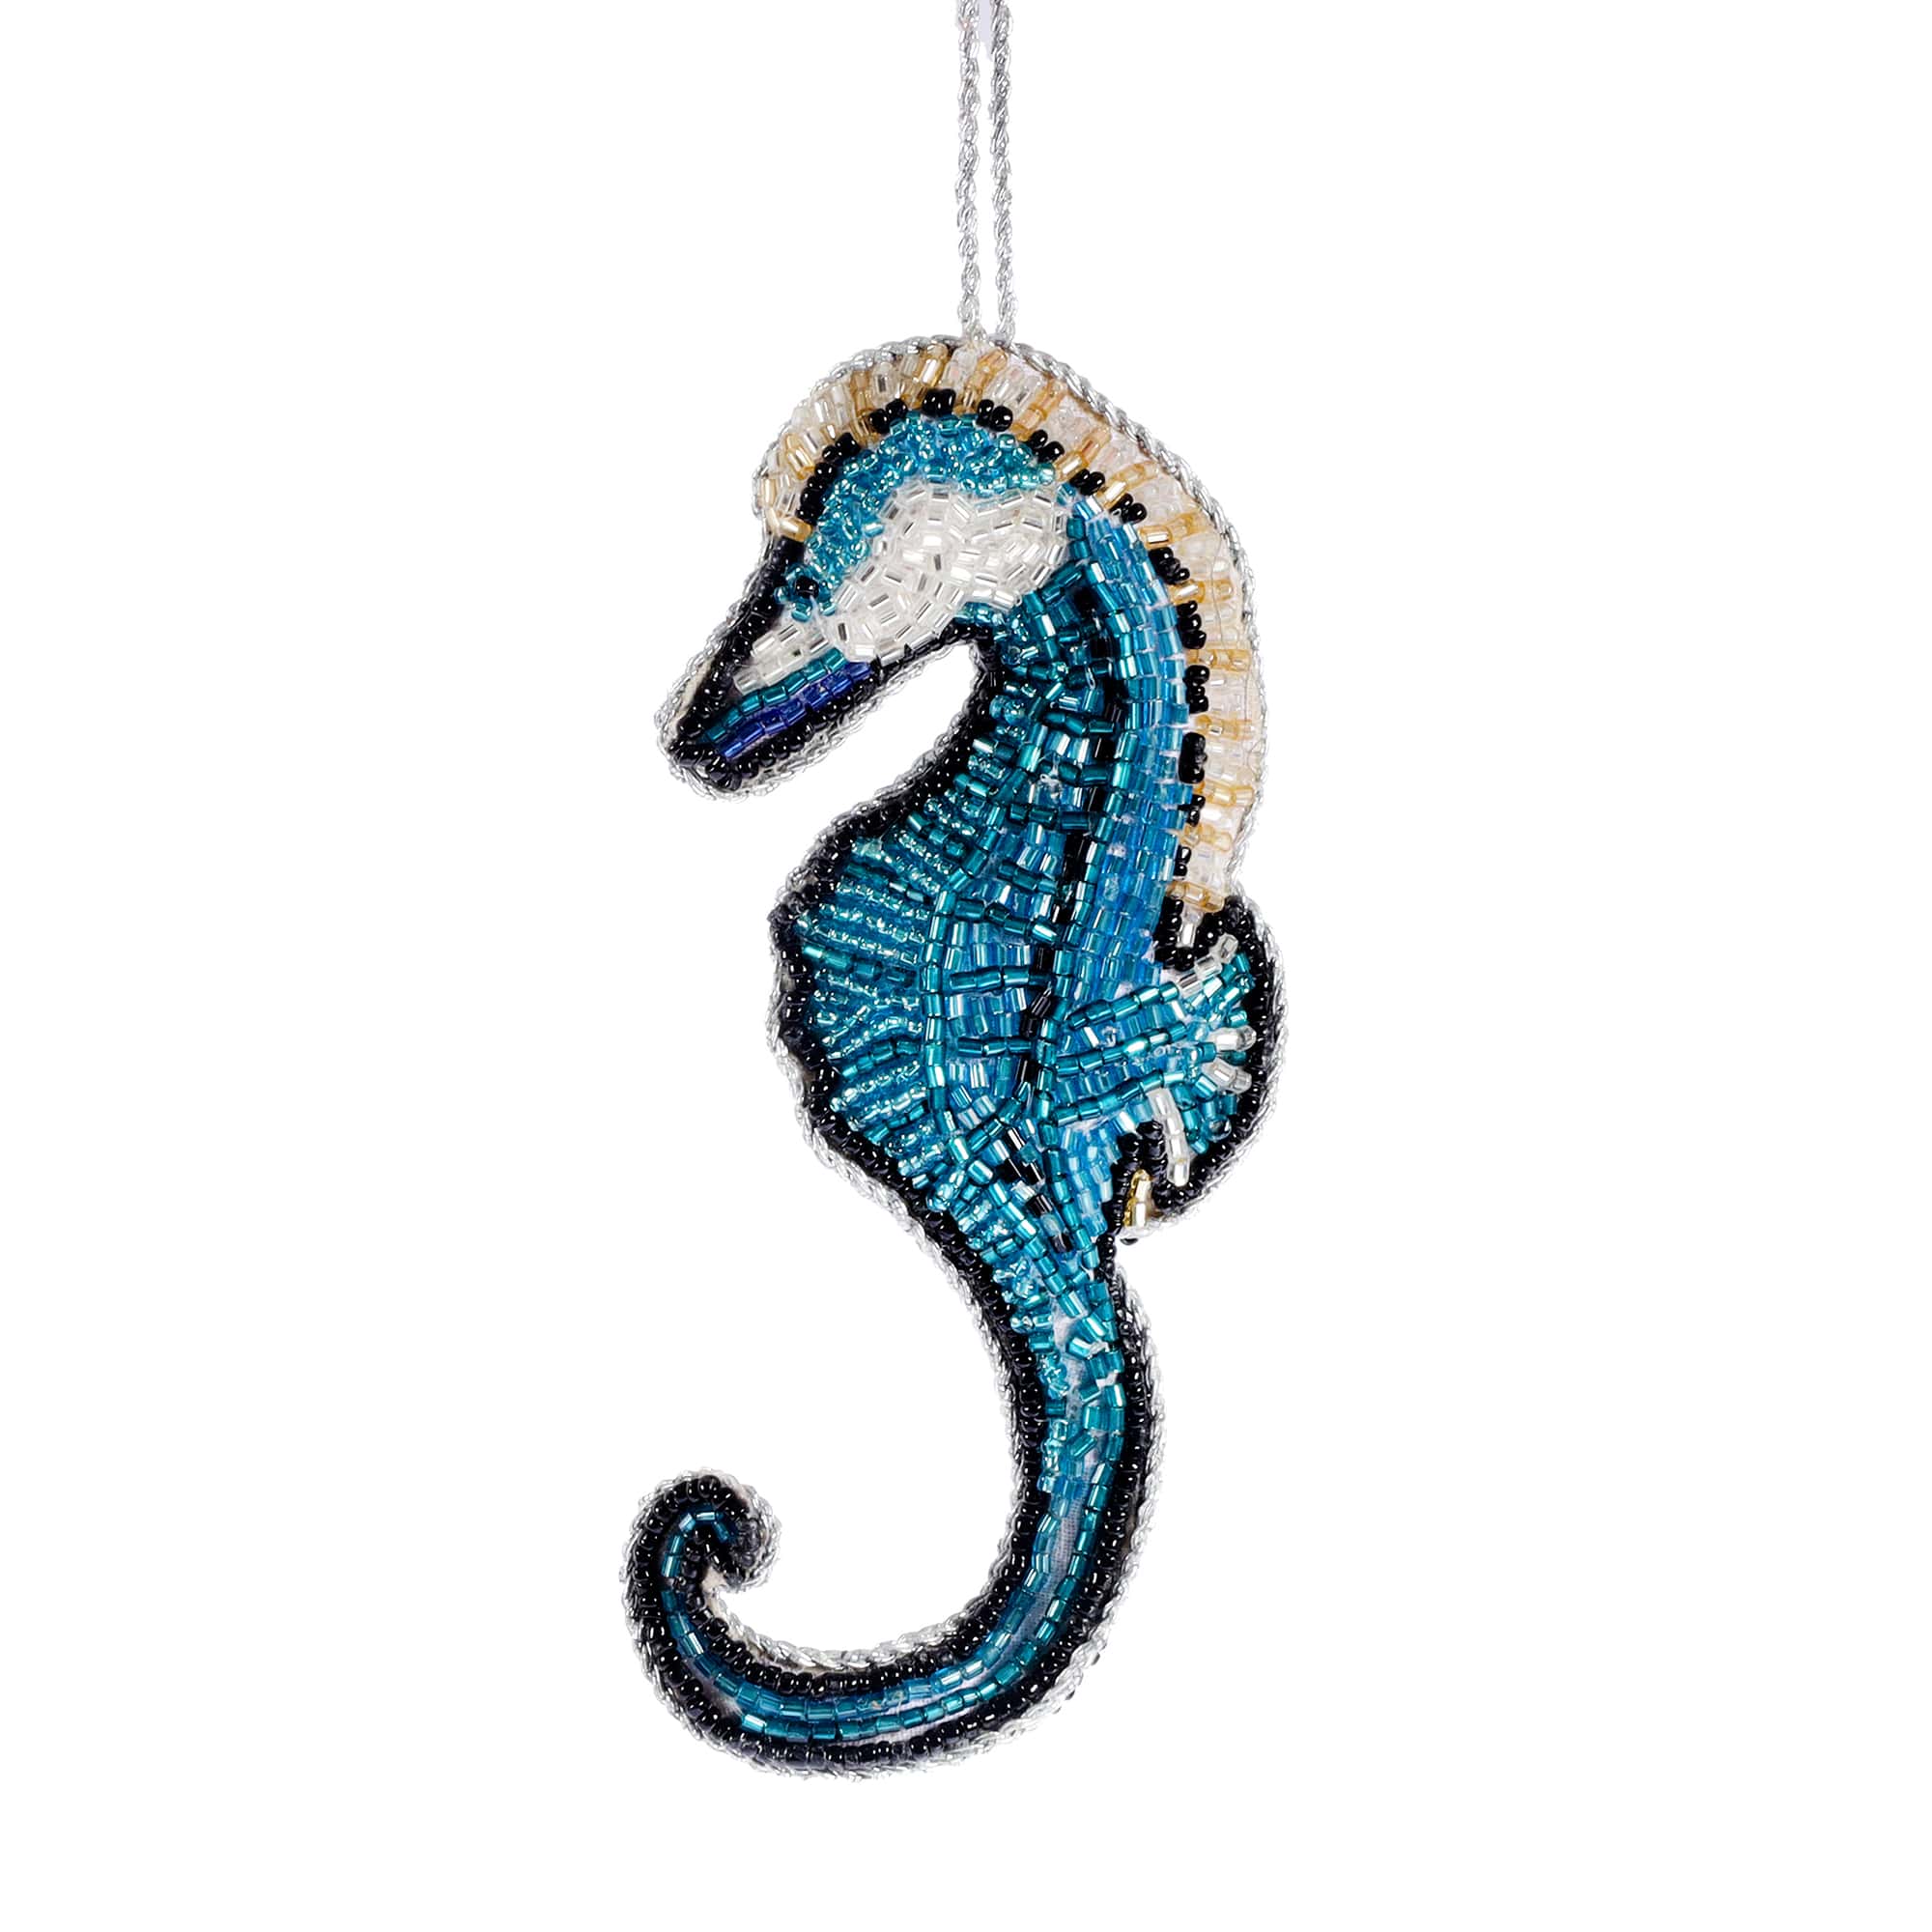 Don't forget to send me a picture of - The Rustic Seahorse